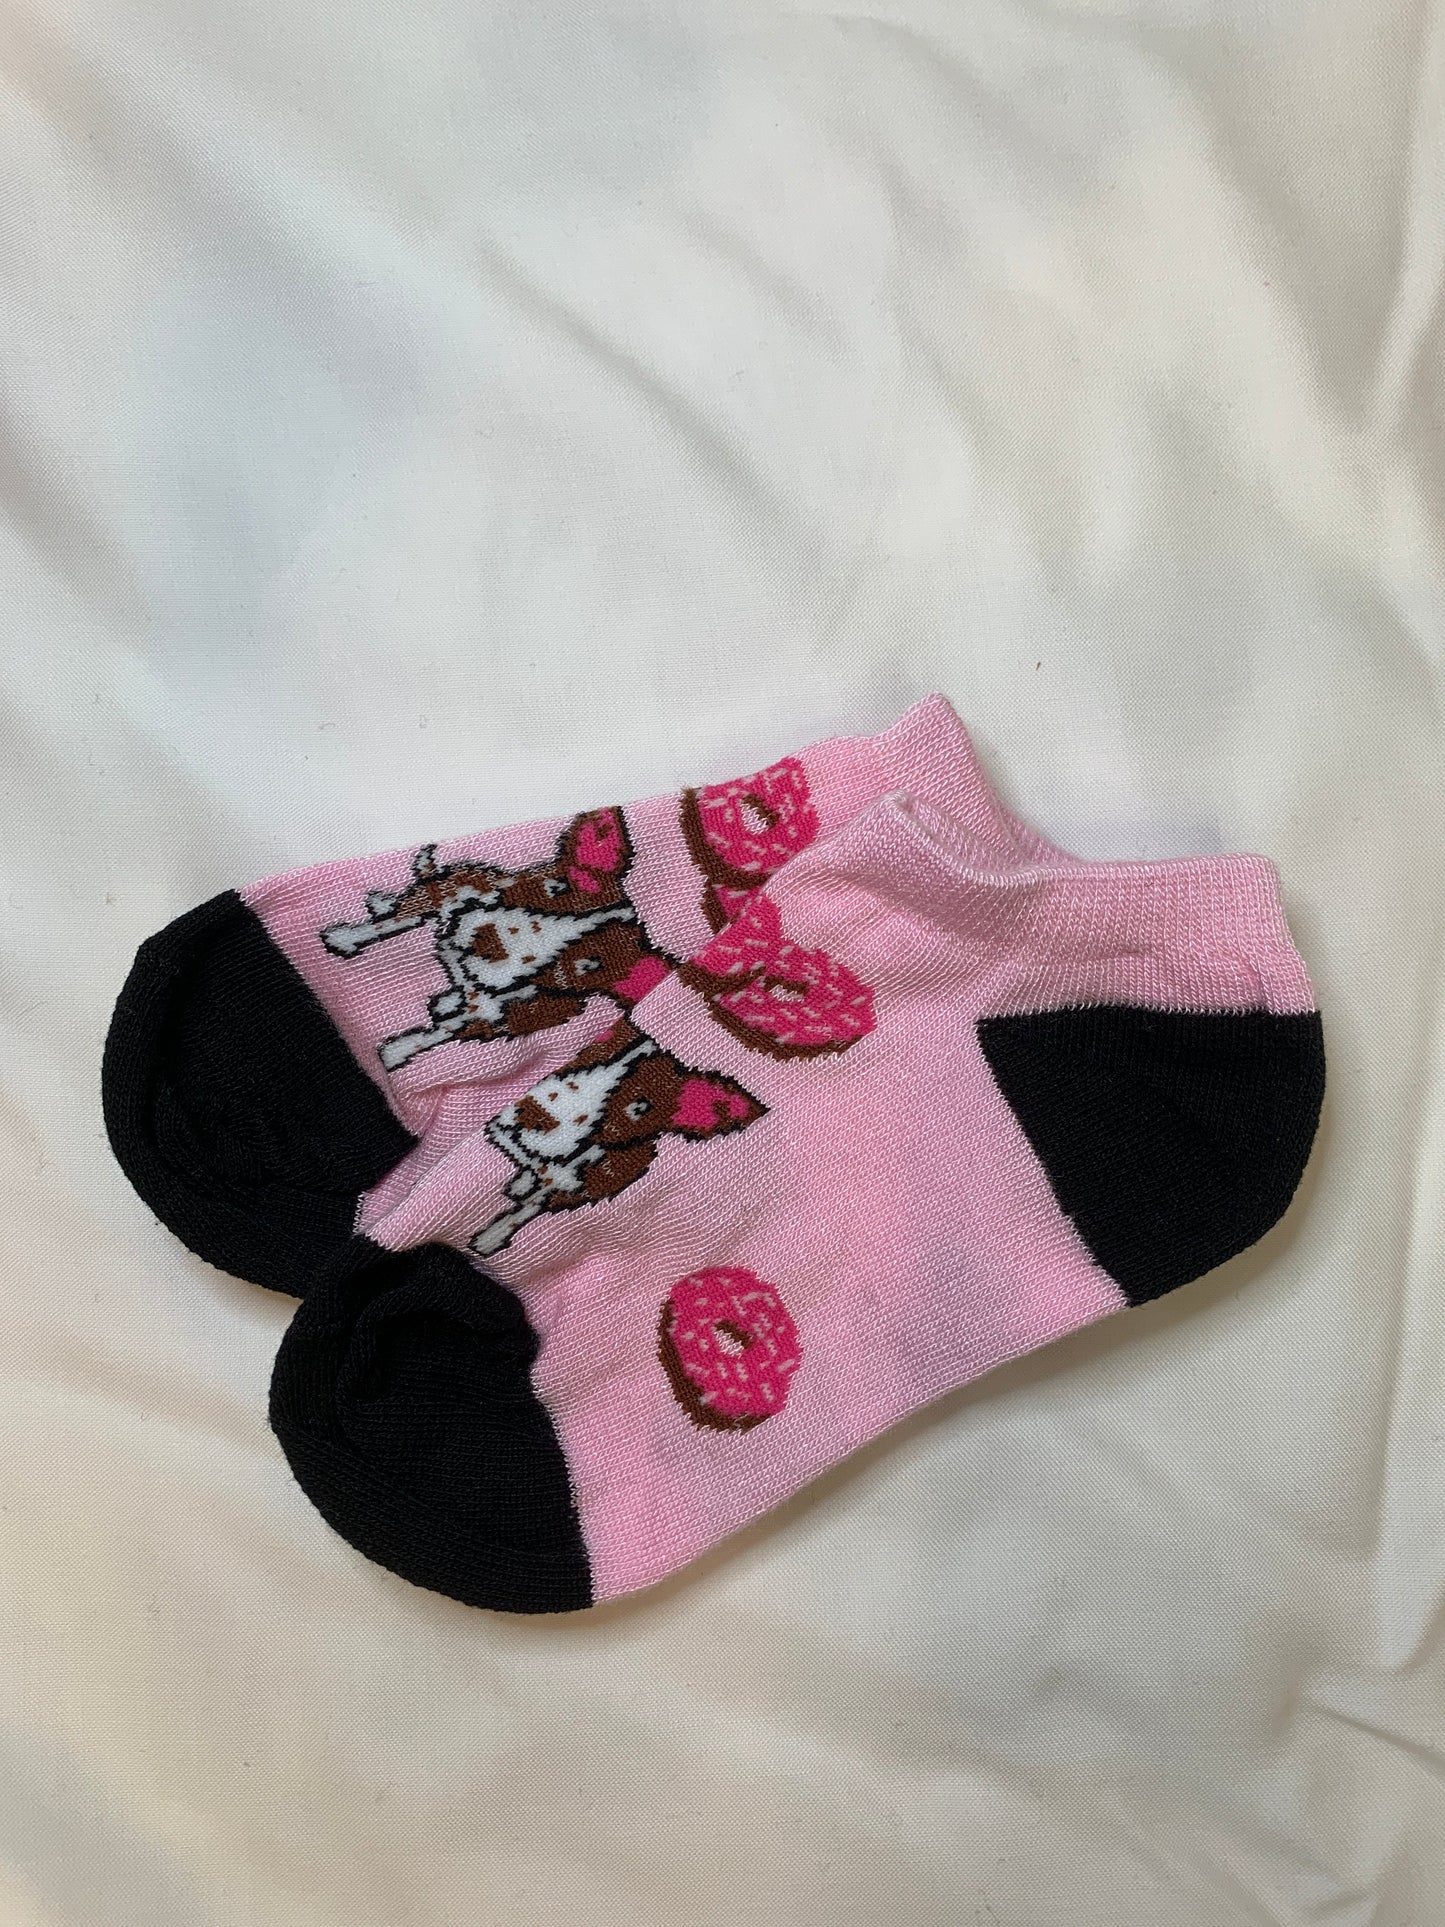 Cute and Funny Bamboo Ankle Socks - Dogs 'N' Donuts (Kids and Adult Sizes)